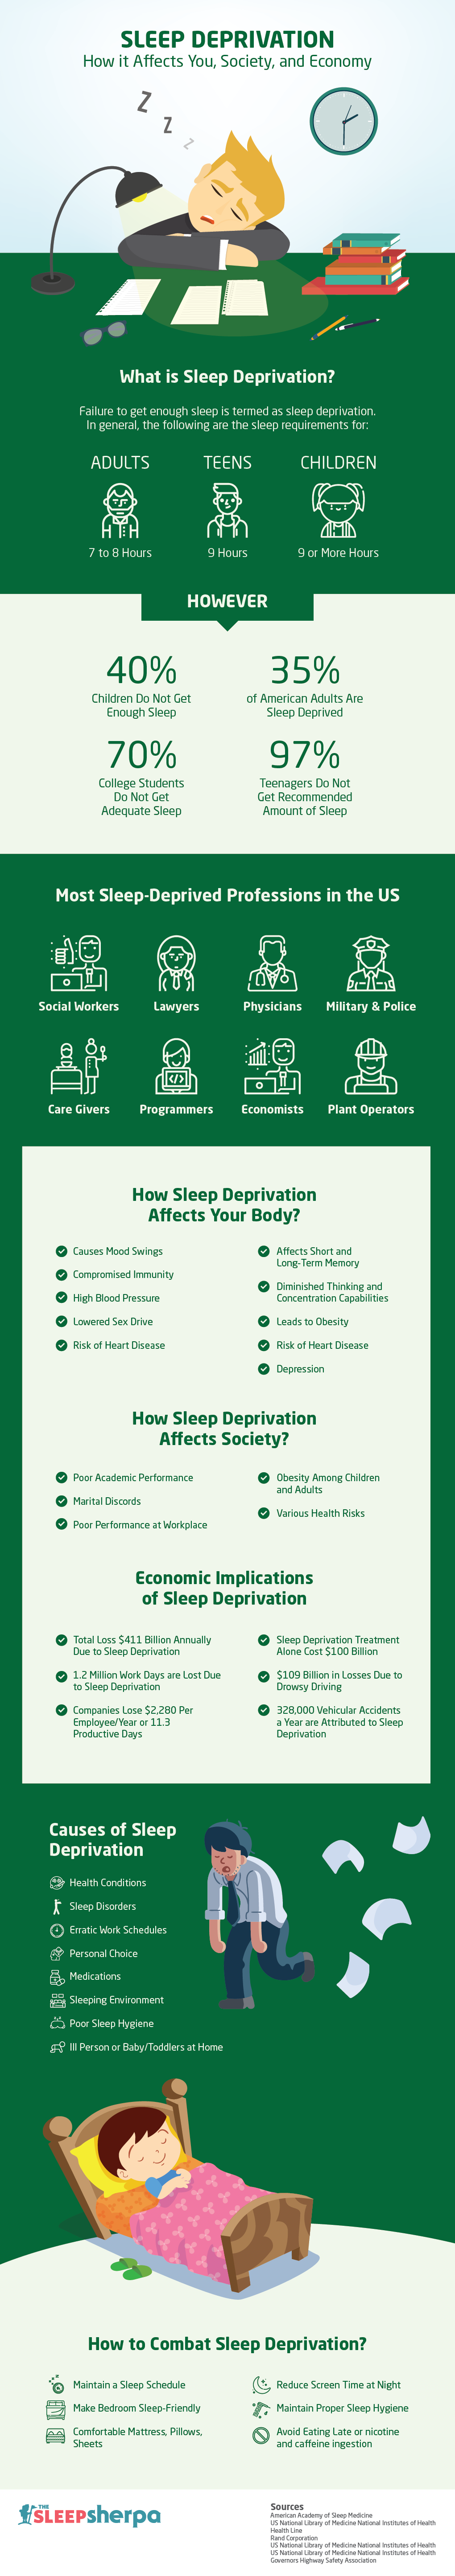 Sleep-Deprivation-How-it-Affects-You-Society-and-Economy-infographic-plaza